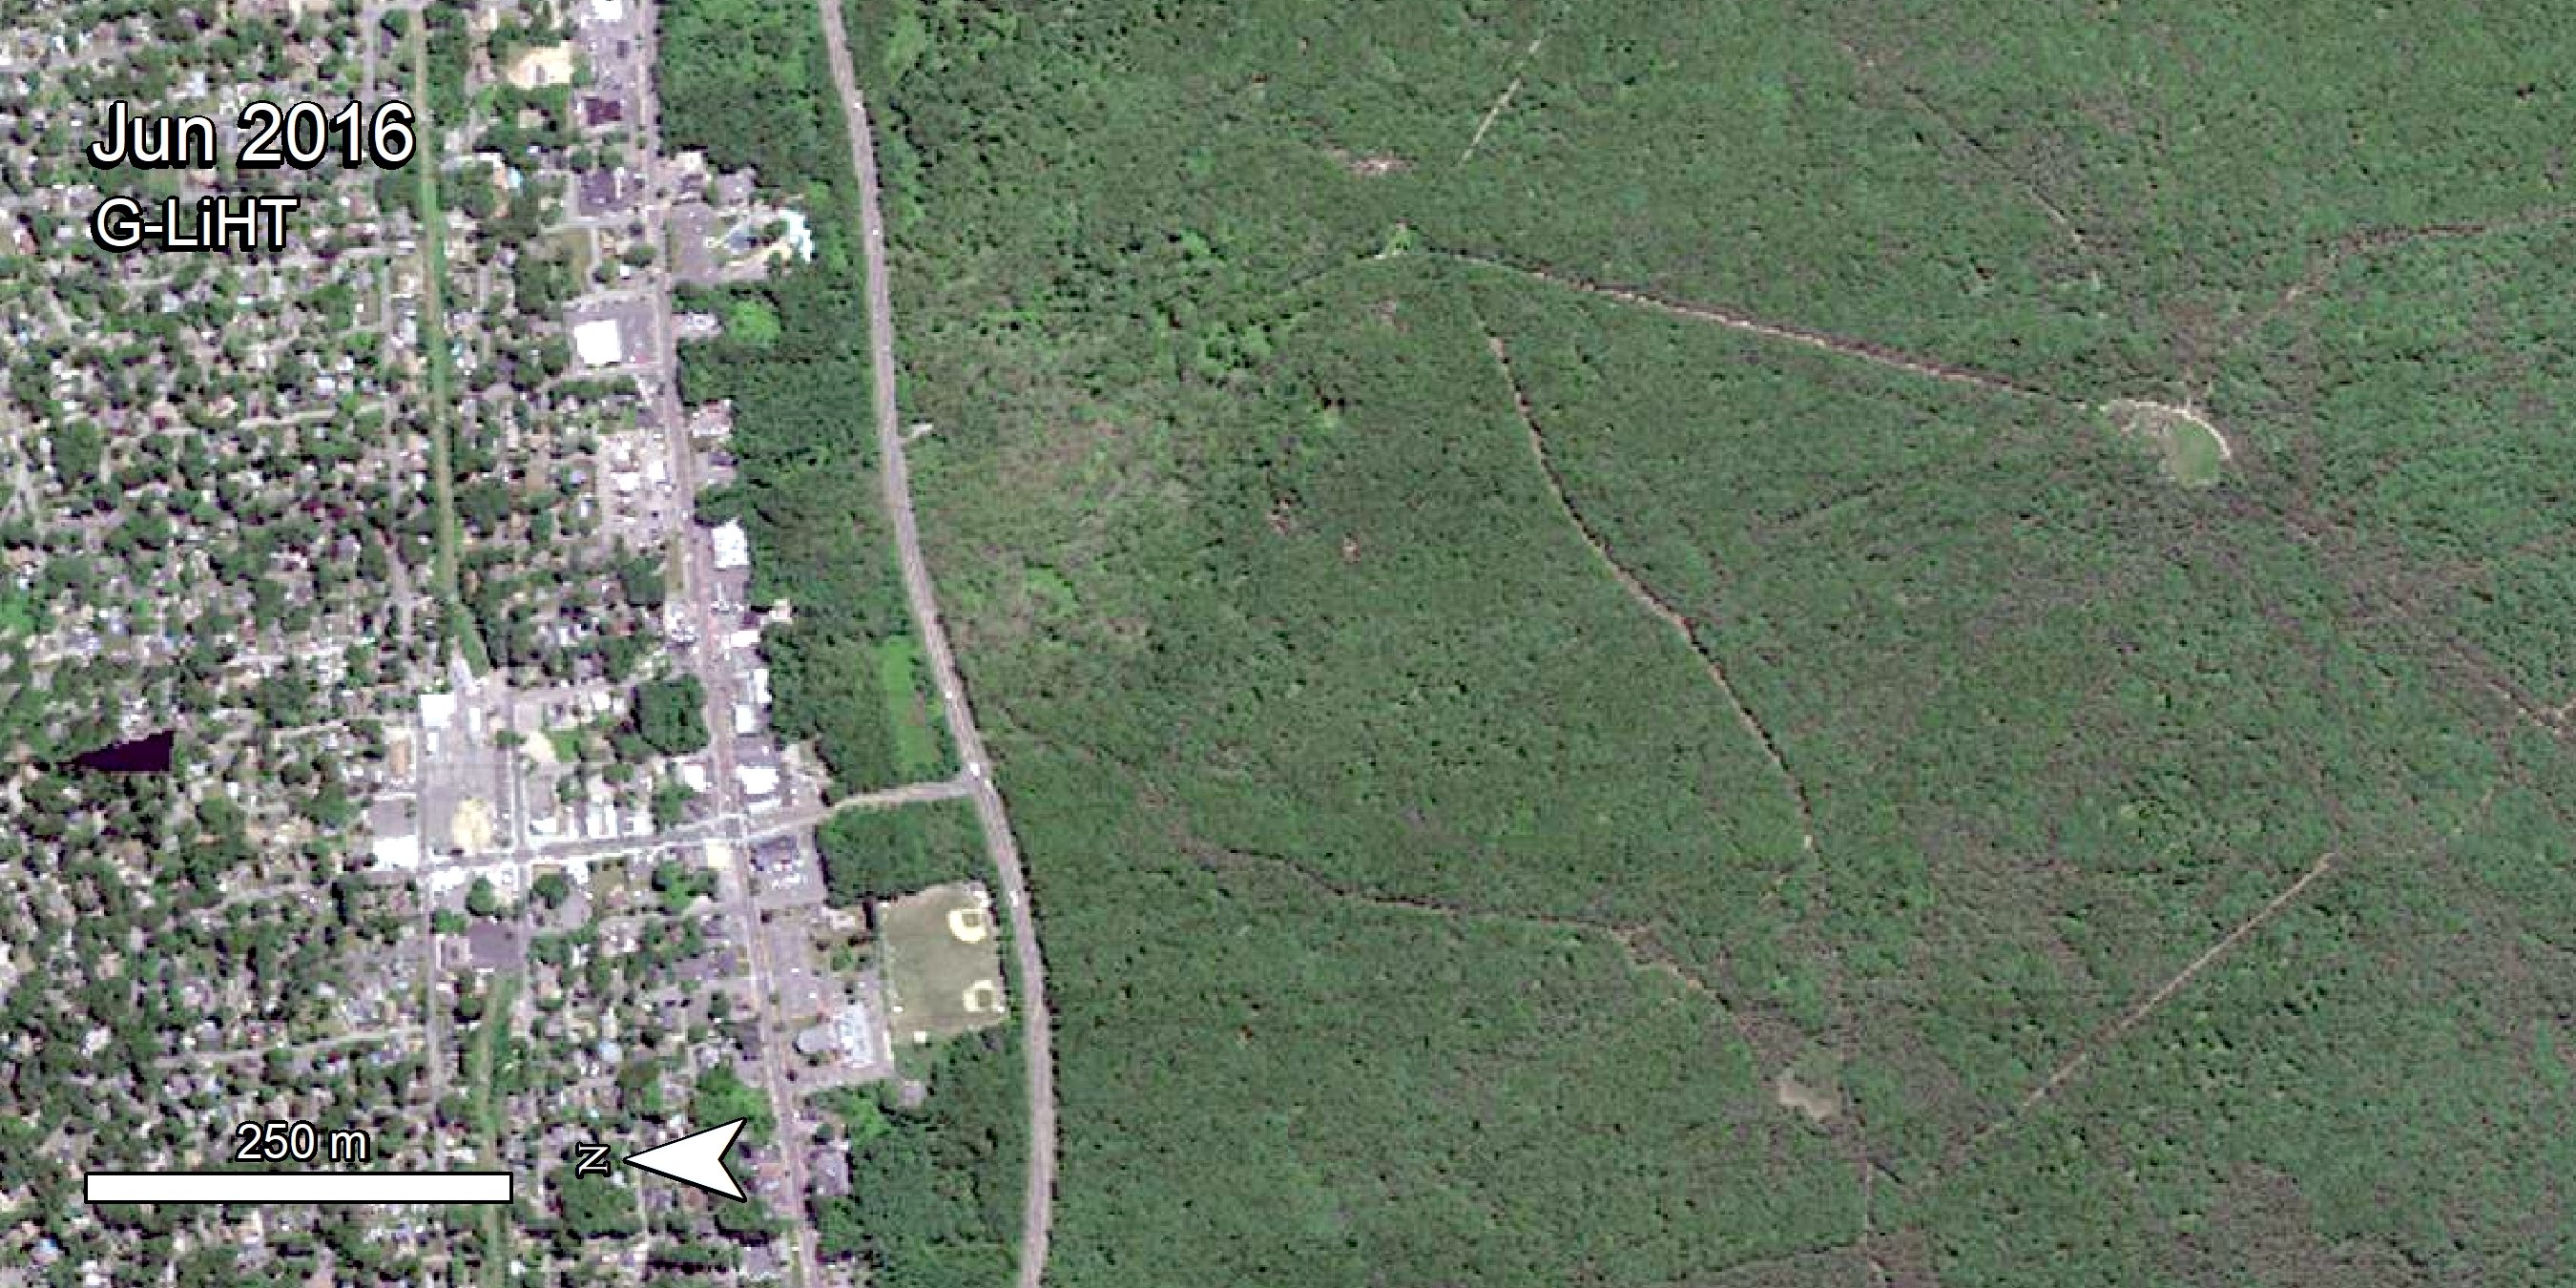 G-LiHT data over a national forest. To the left of the image are some neighborhoods, to the right is forested land.